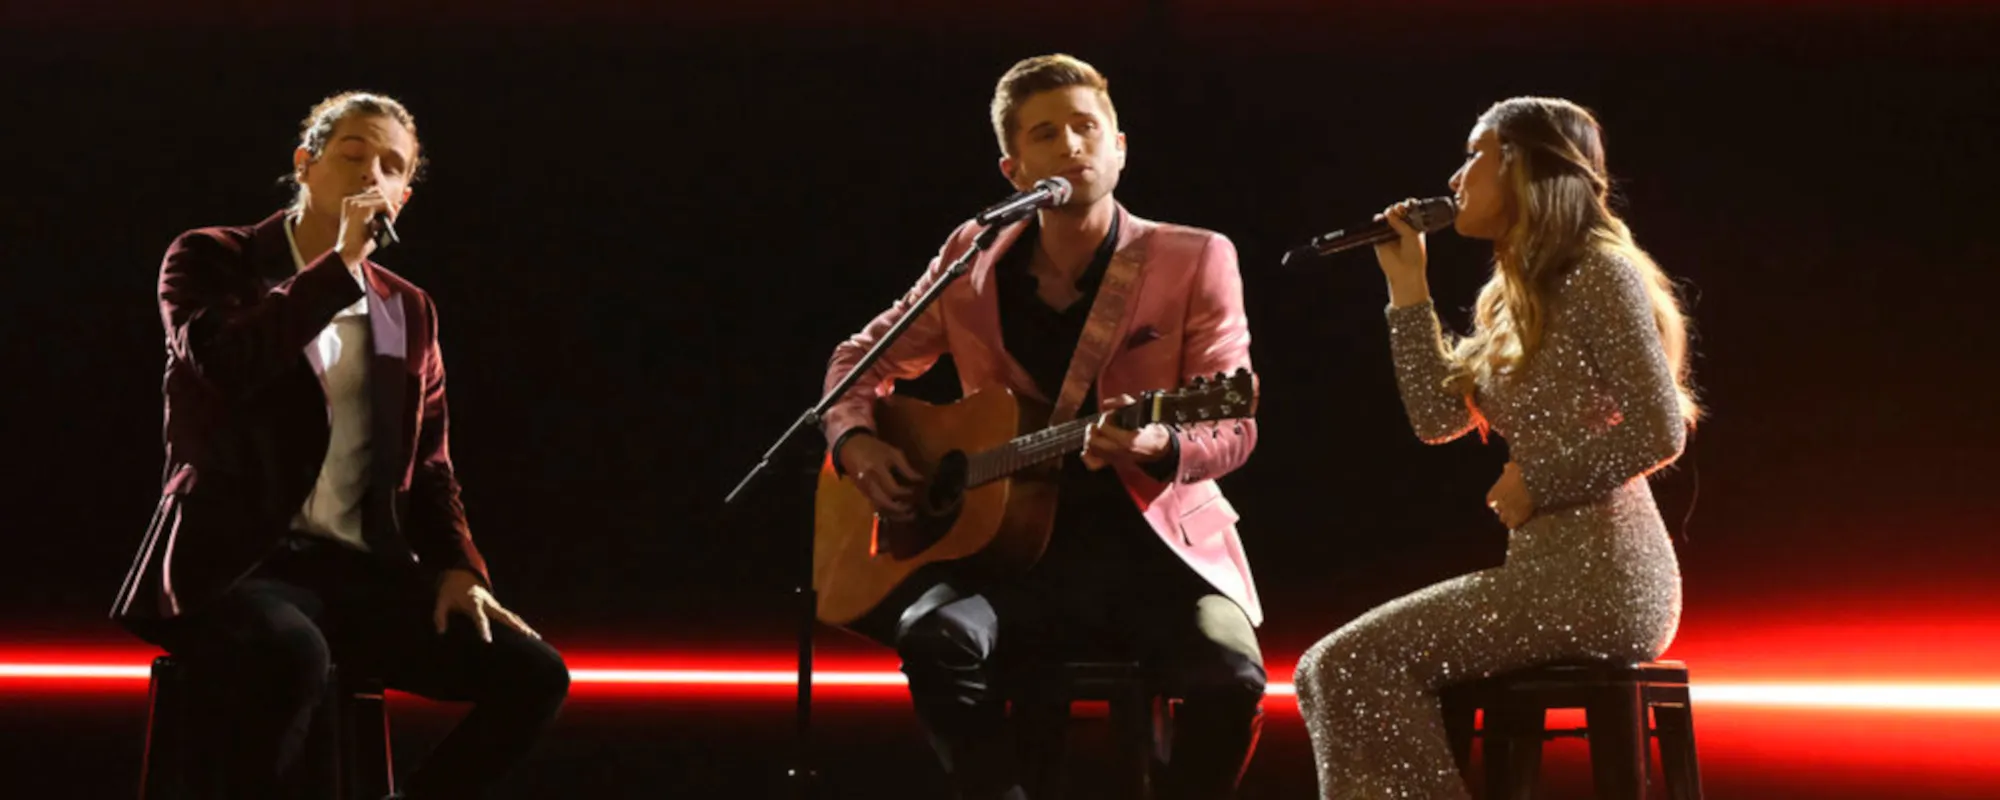 ‘The Voice‘ Finale Week: Girl Named Tom Covers Fleetwood Mac and The Foundations Ahead of Final Performance